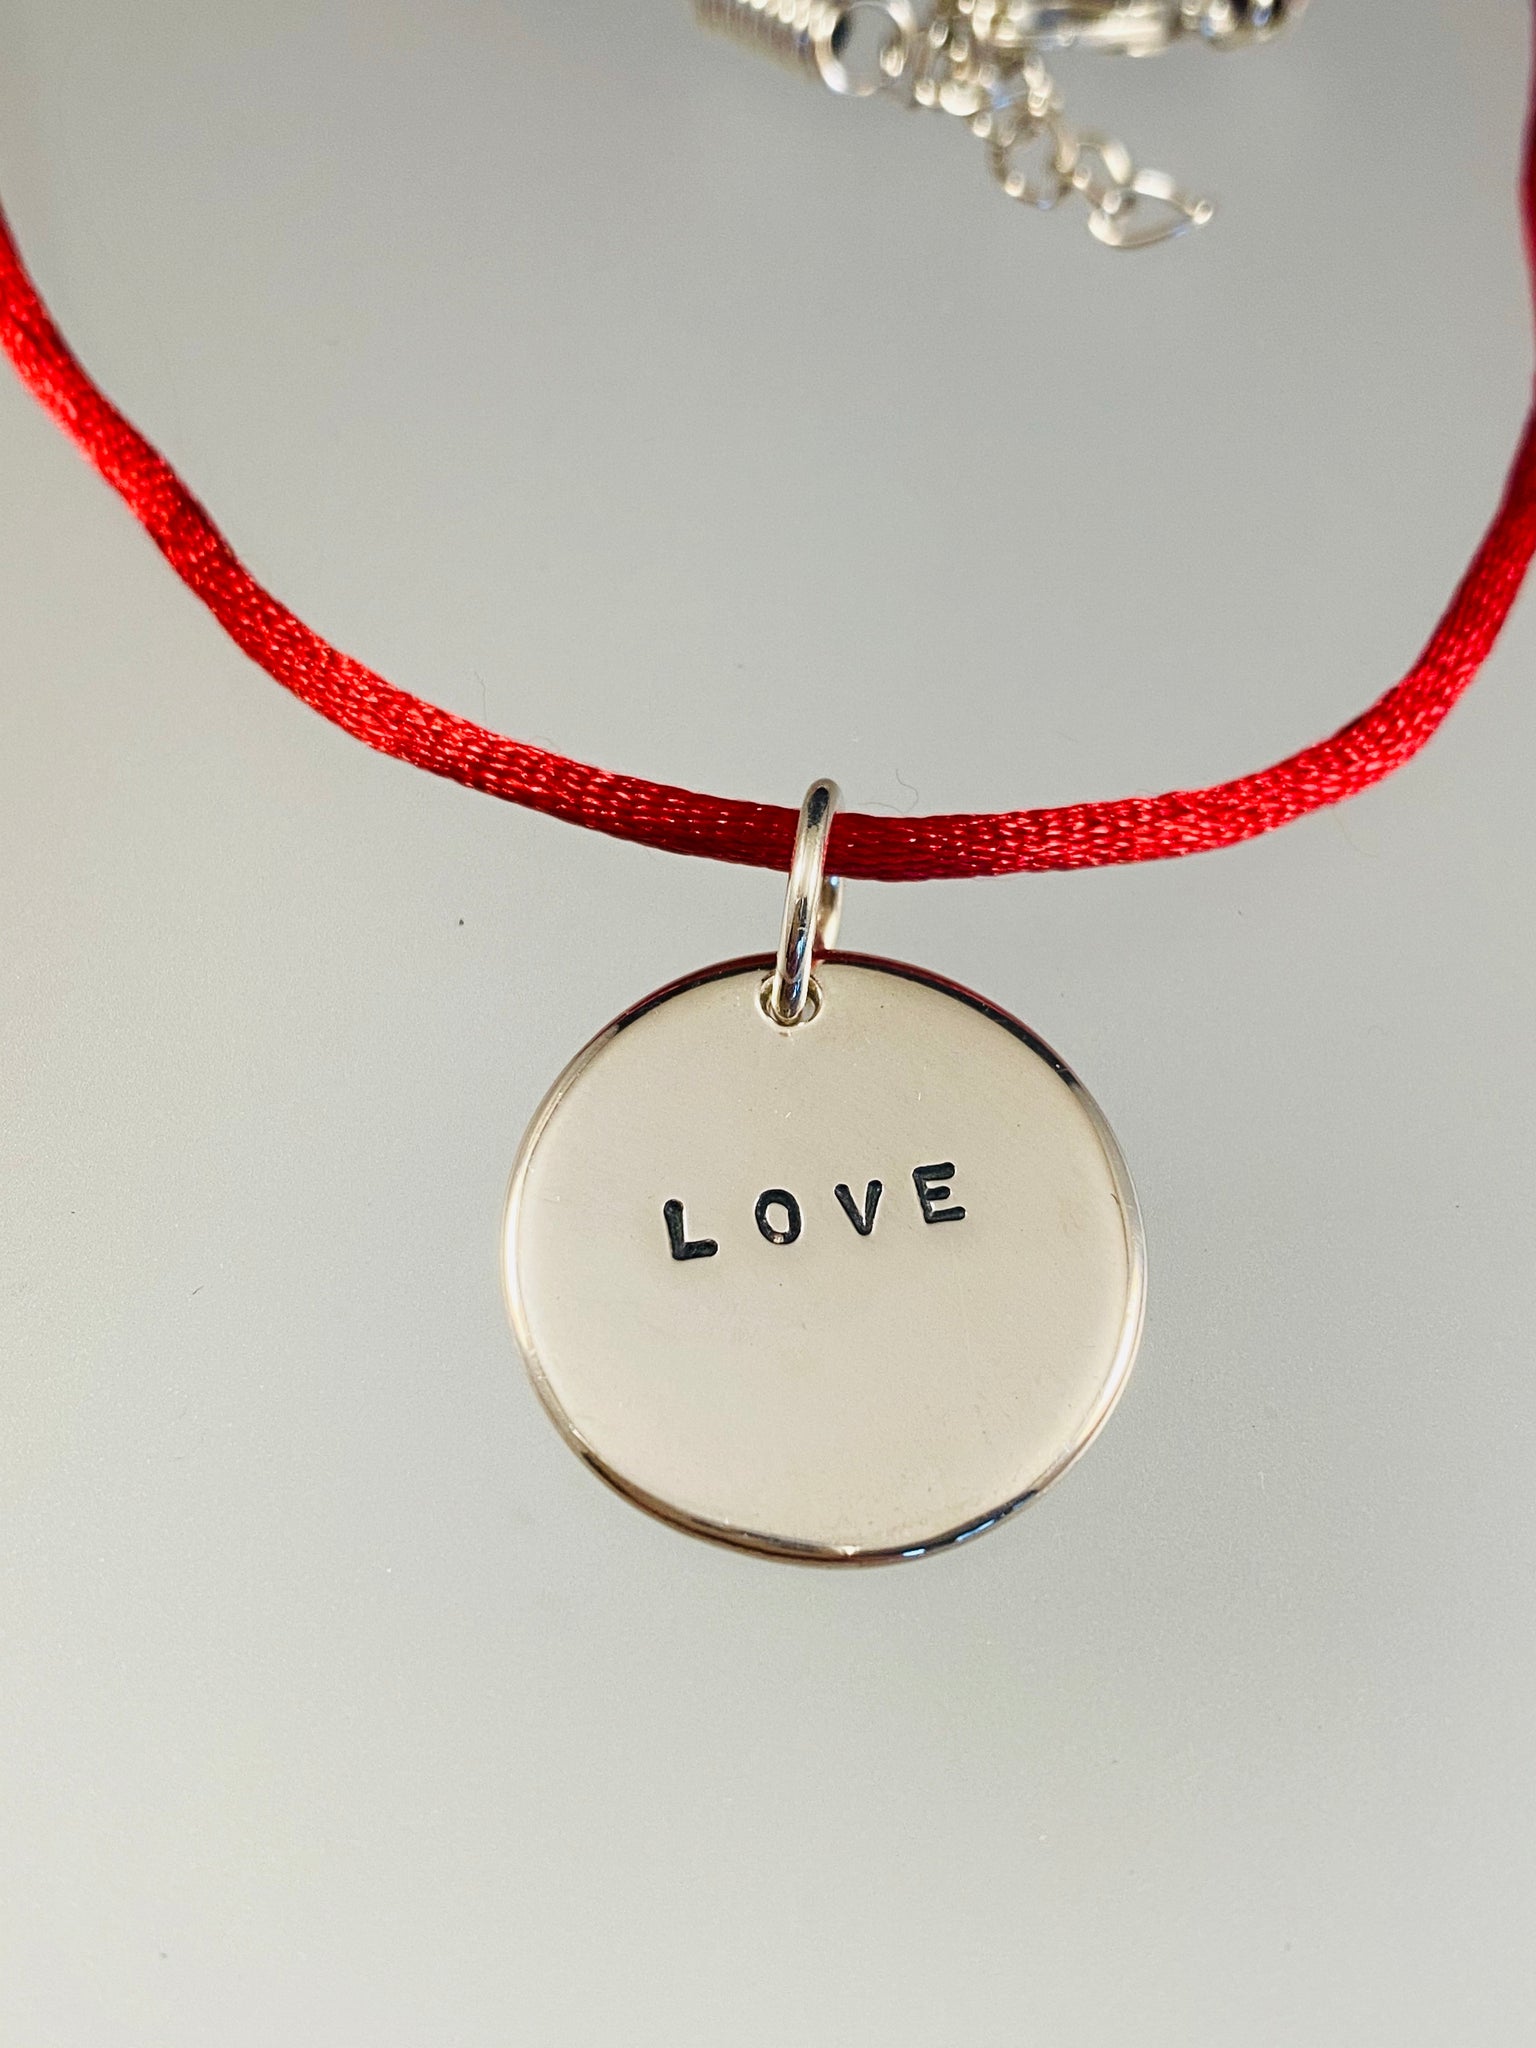 Sterling 'Love' Charm on Red Satin Cord